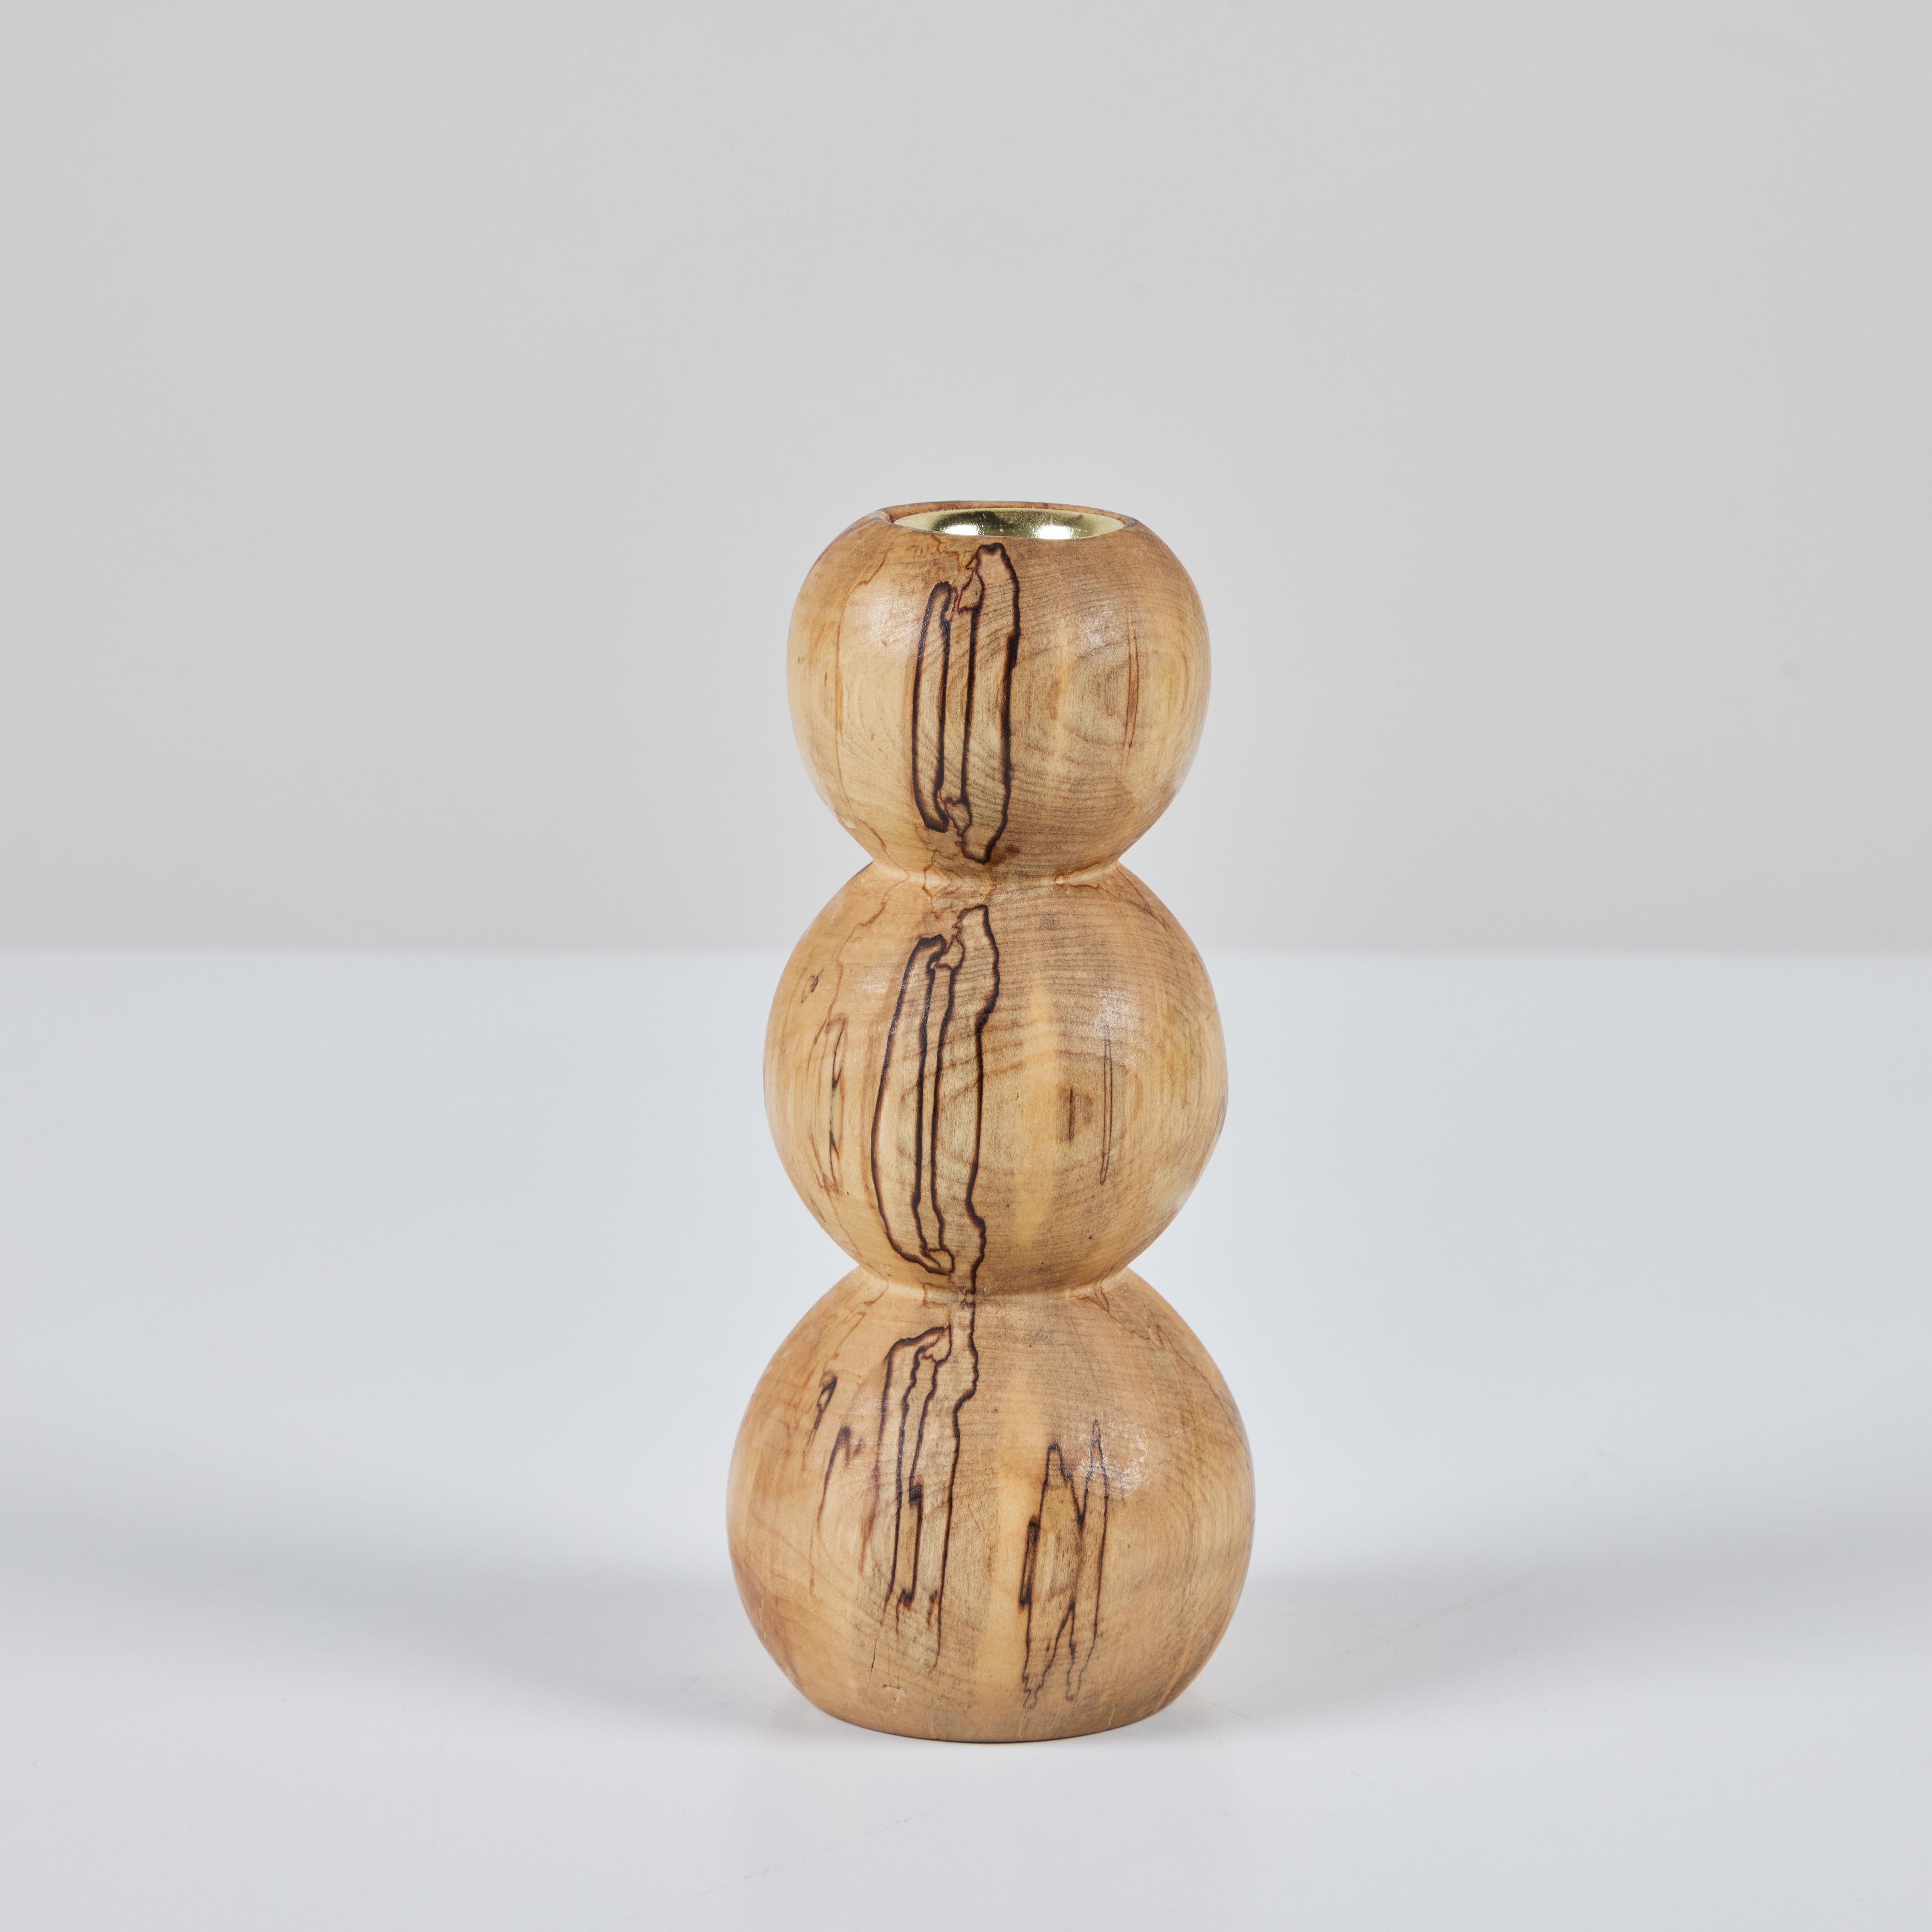 Hand crafted candlestick in spalted birch by local Los Angeles artist Evan Segota. The candle holder features a bubble shape and inset brass cup.

Evan Segota is a furniture / product / object designer and artist with a BS in industrial design, and